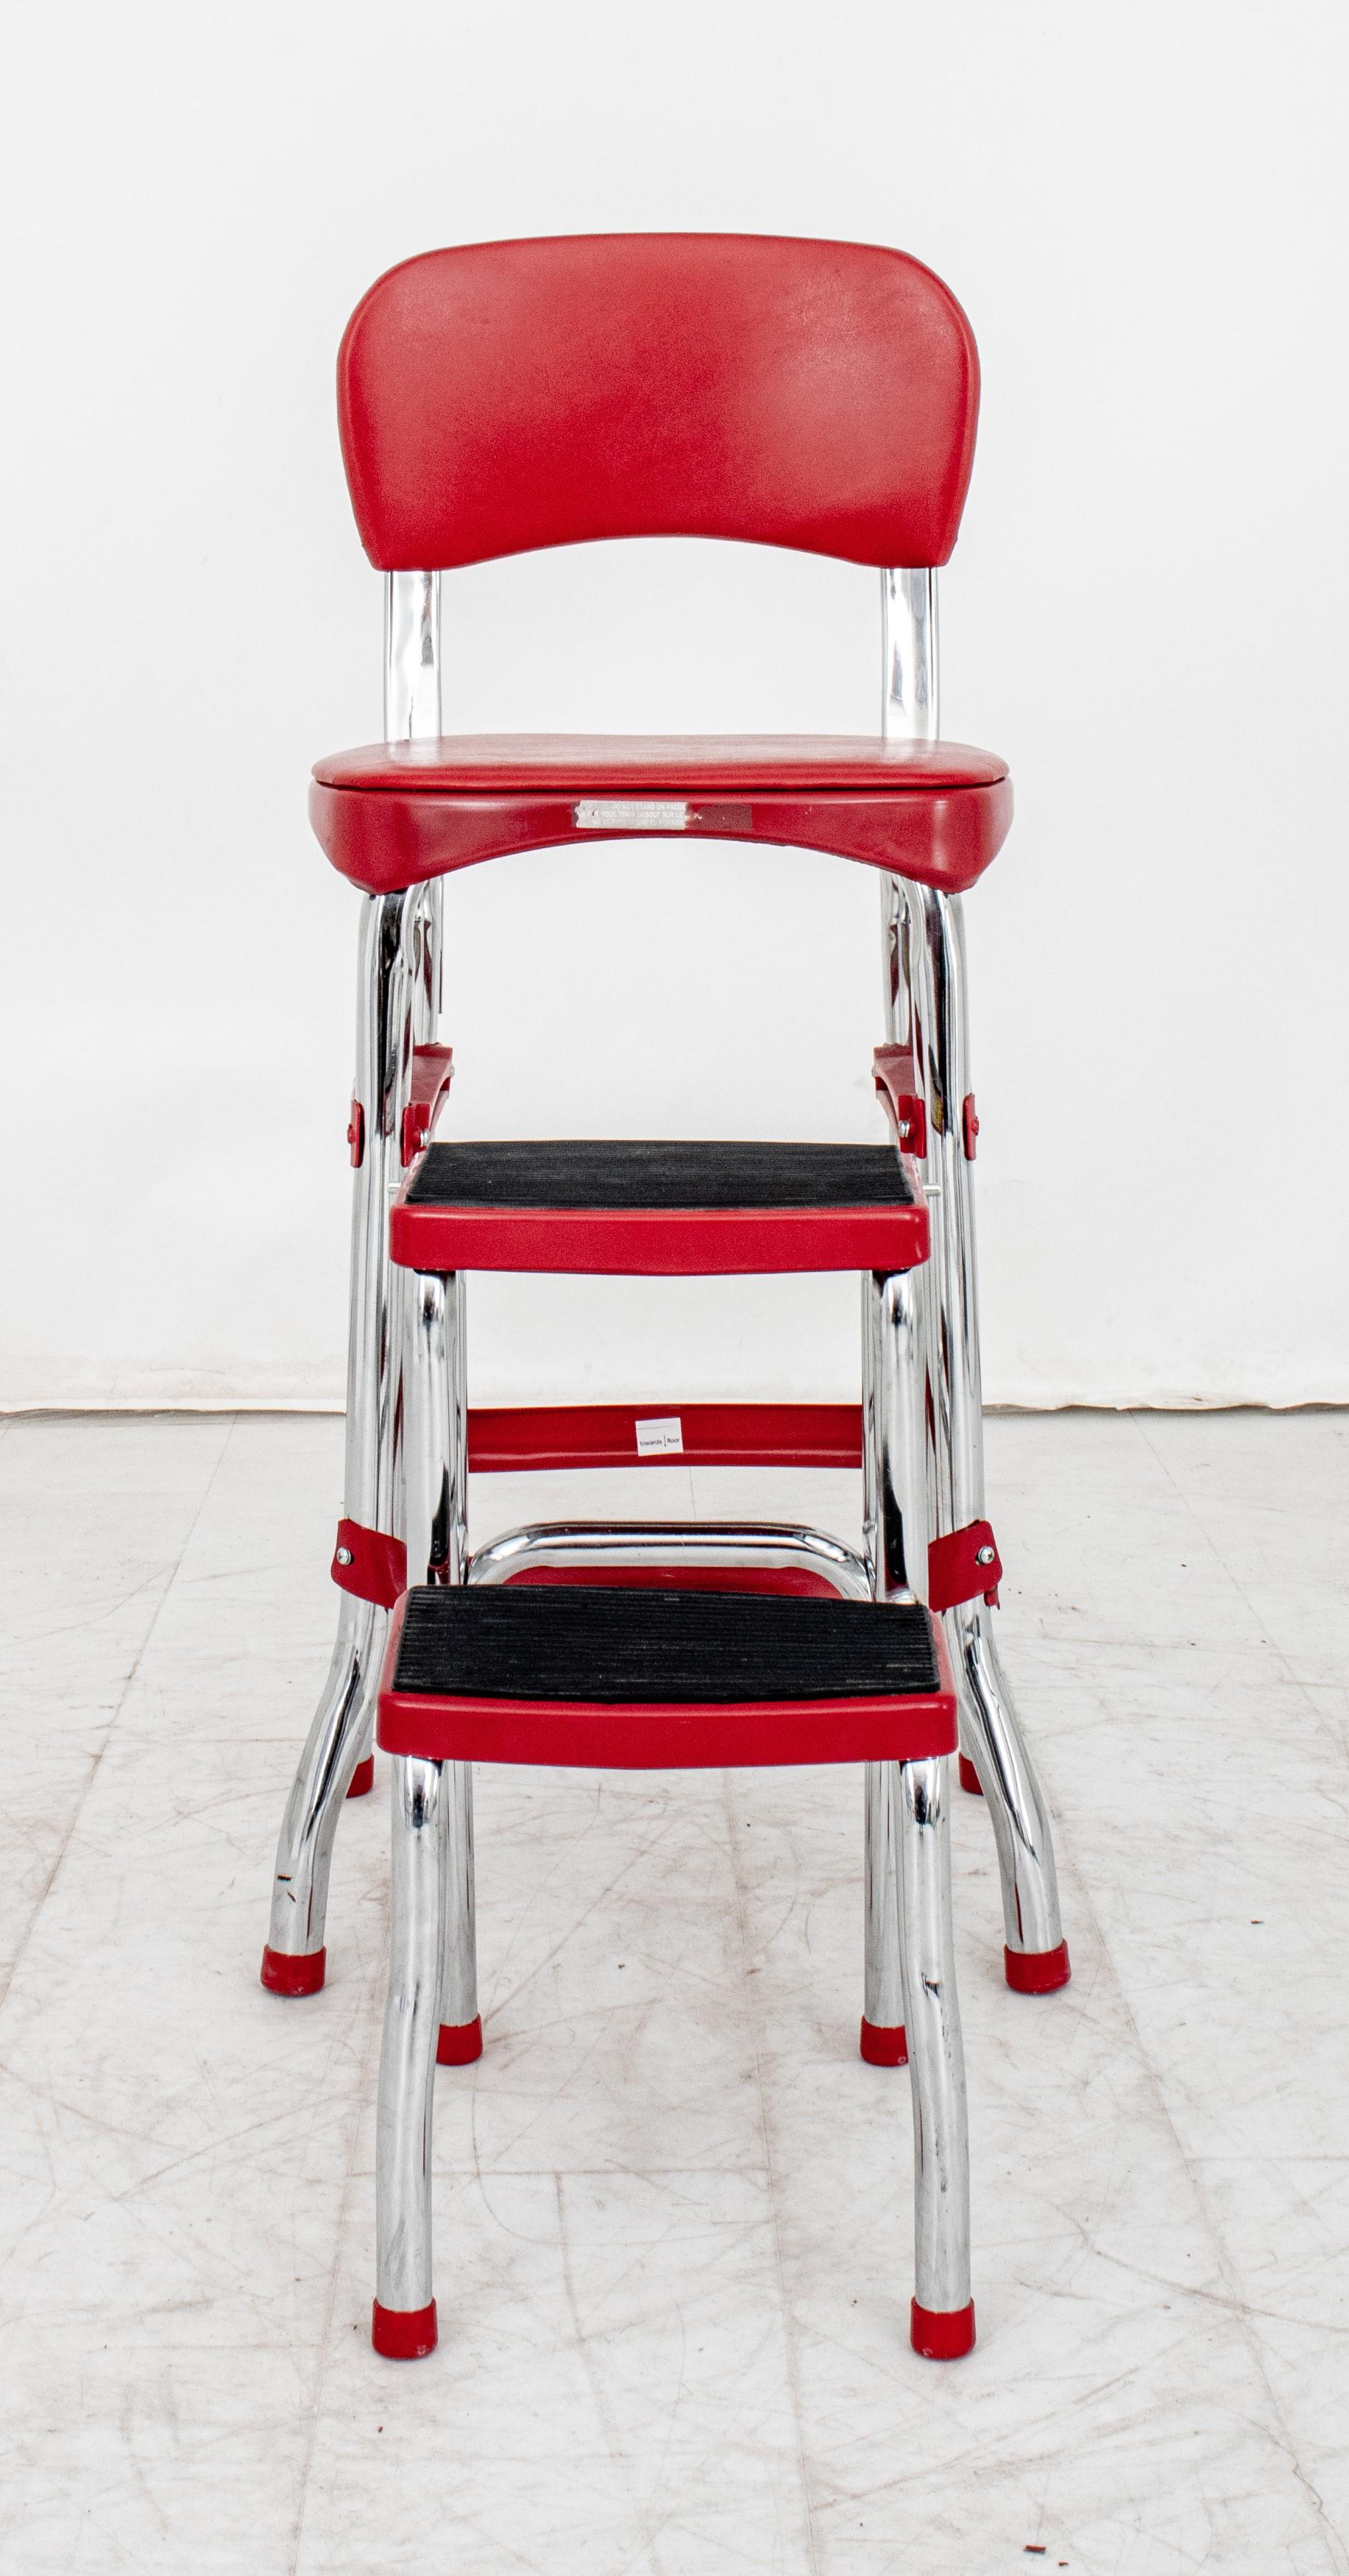 red step stool chair